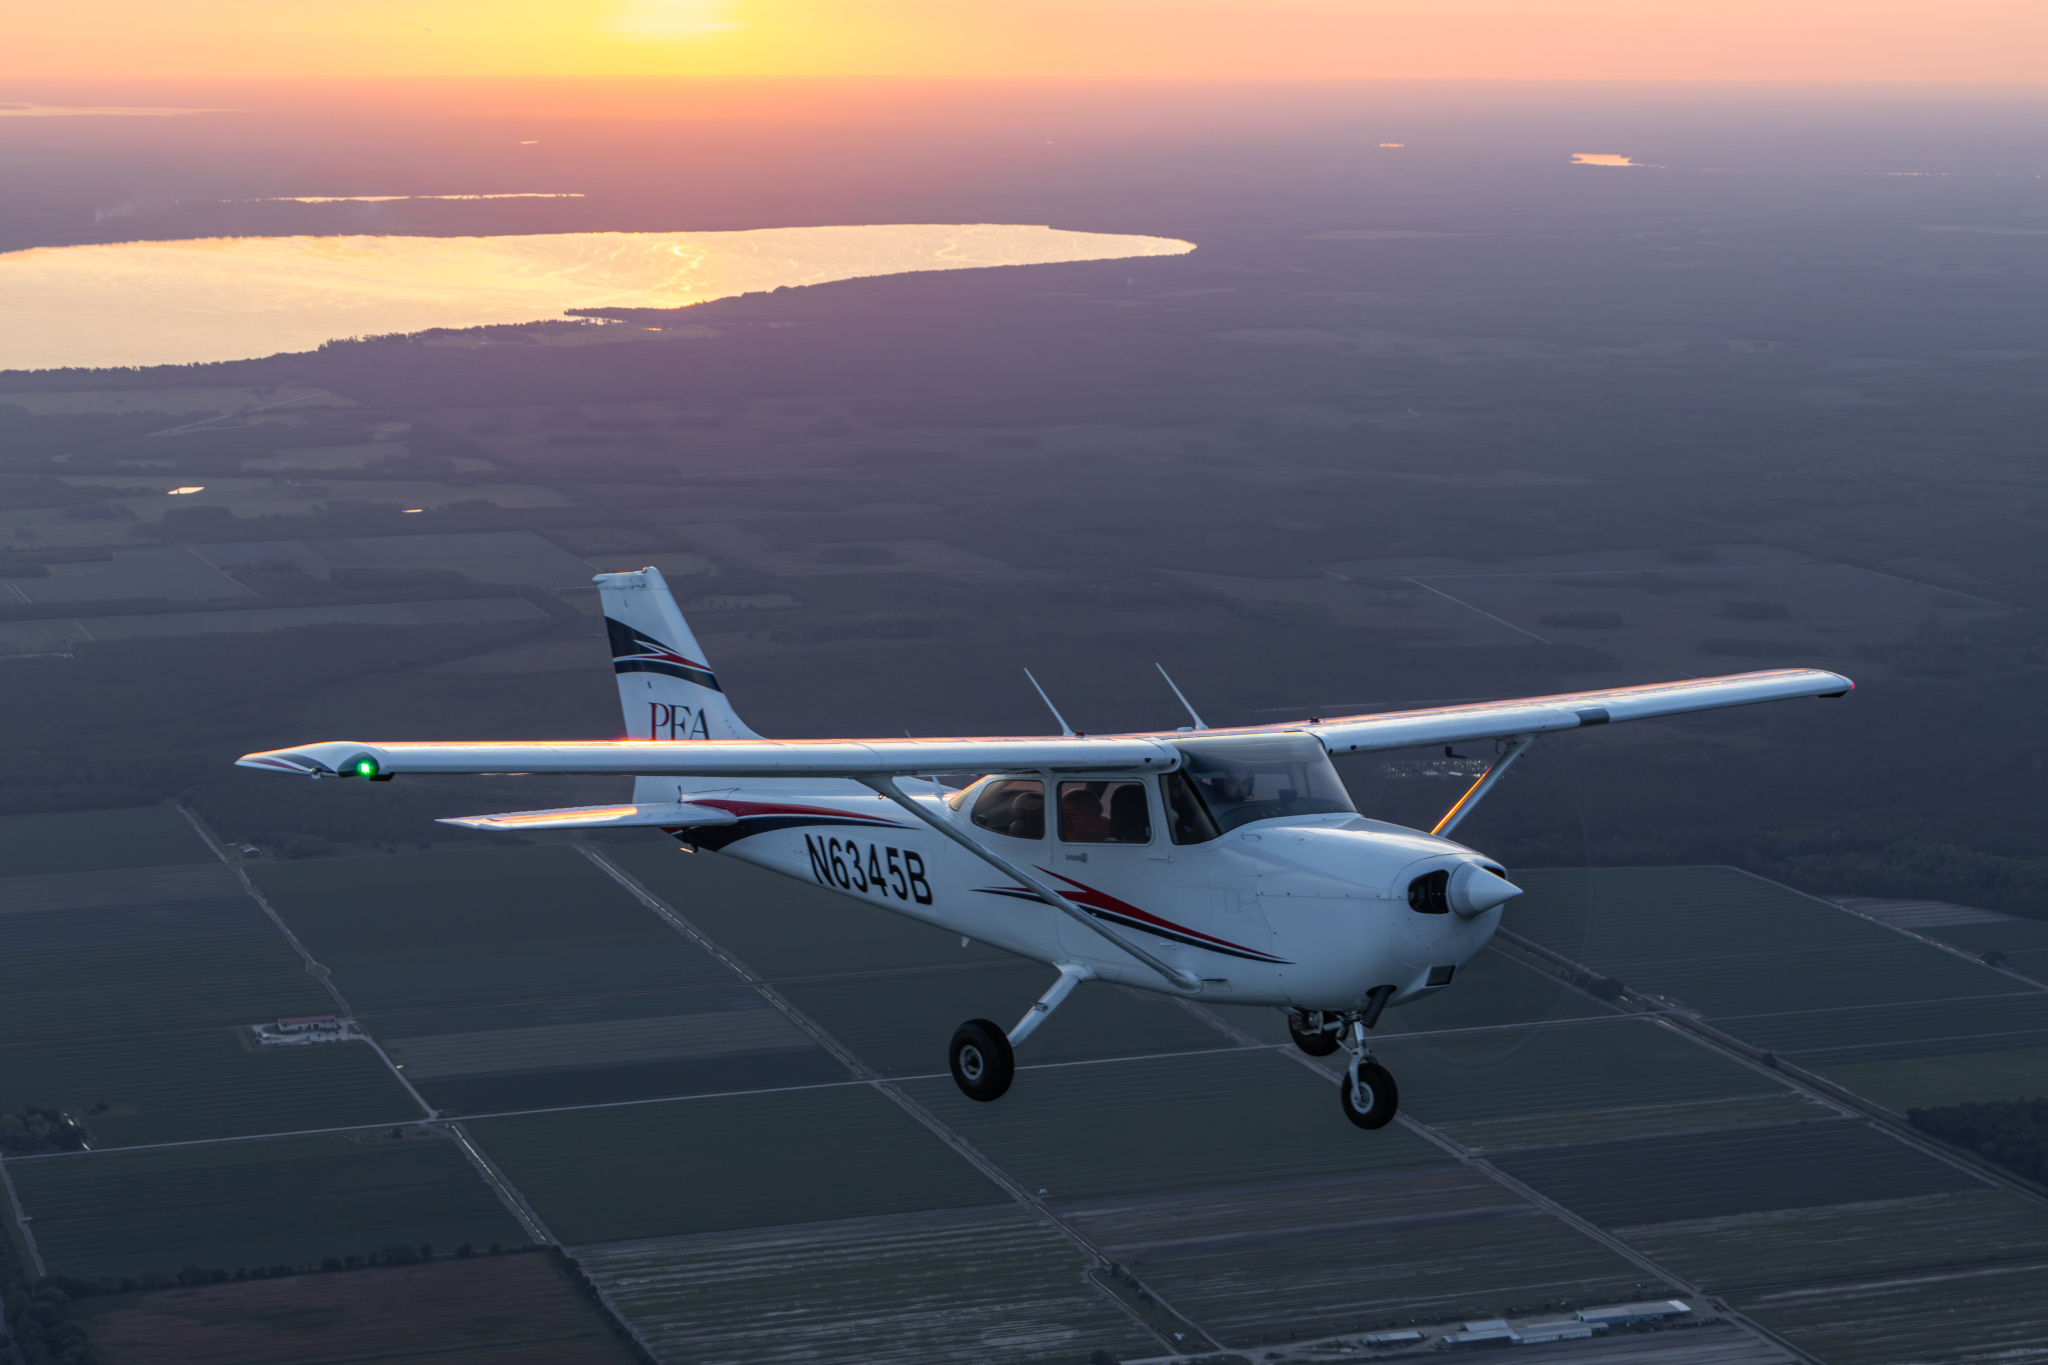 PEA Cessna N6345B from formation photoshoot over field during sunset